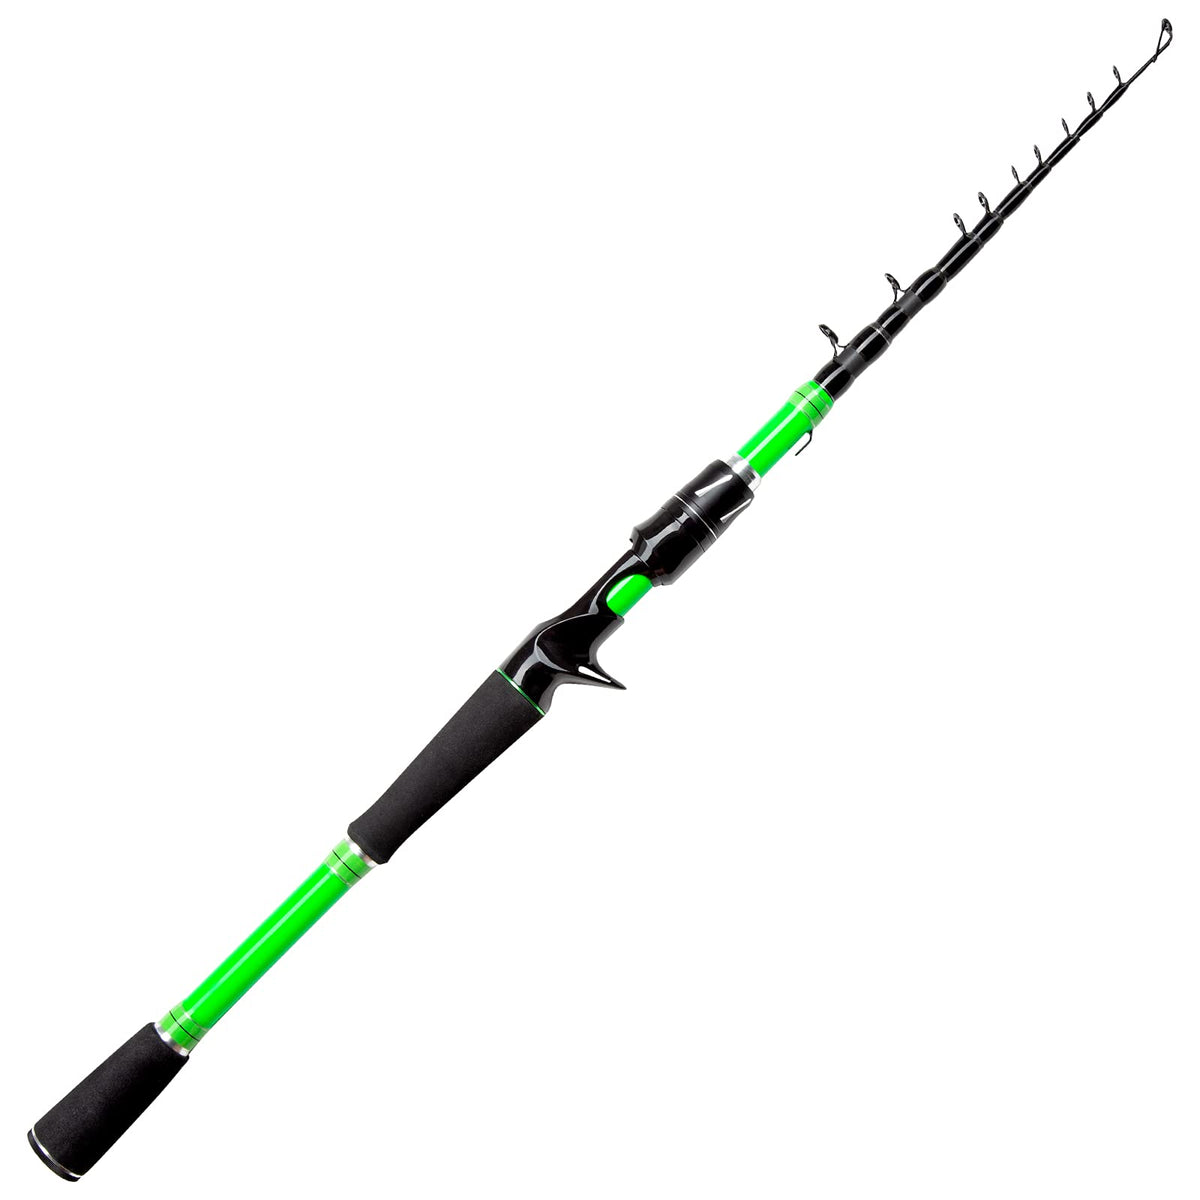  Spinning Rod-Lightweight Carbon Spinning Fishing Rod Freshwater,Casting  Fishing Rod with Comfort EVA Grip Rod Handle Smooth Guides-MH,Casting,1.8m  : Sports & Outdoors